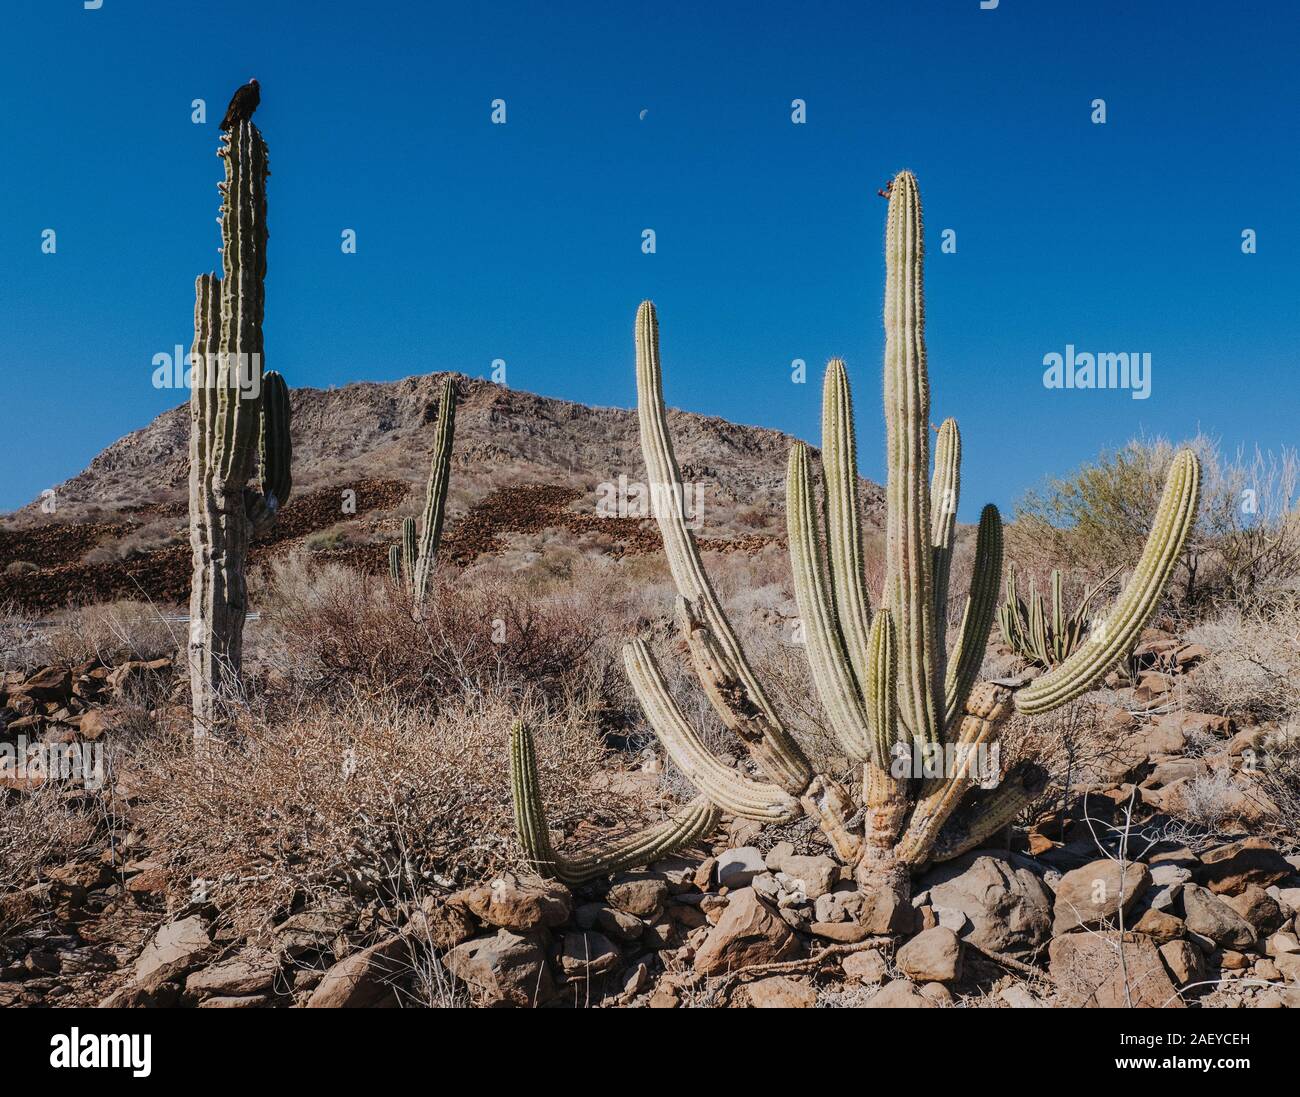 vulture sitting on cactus in Mexican desert Stock Photo